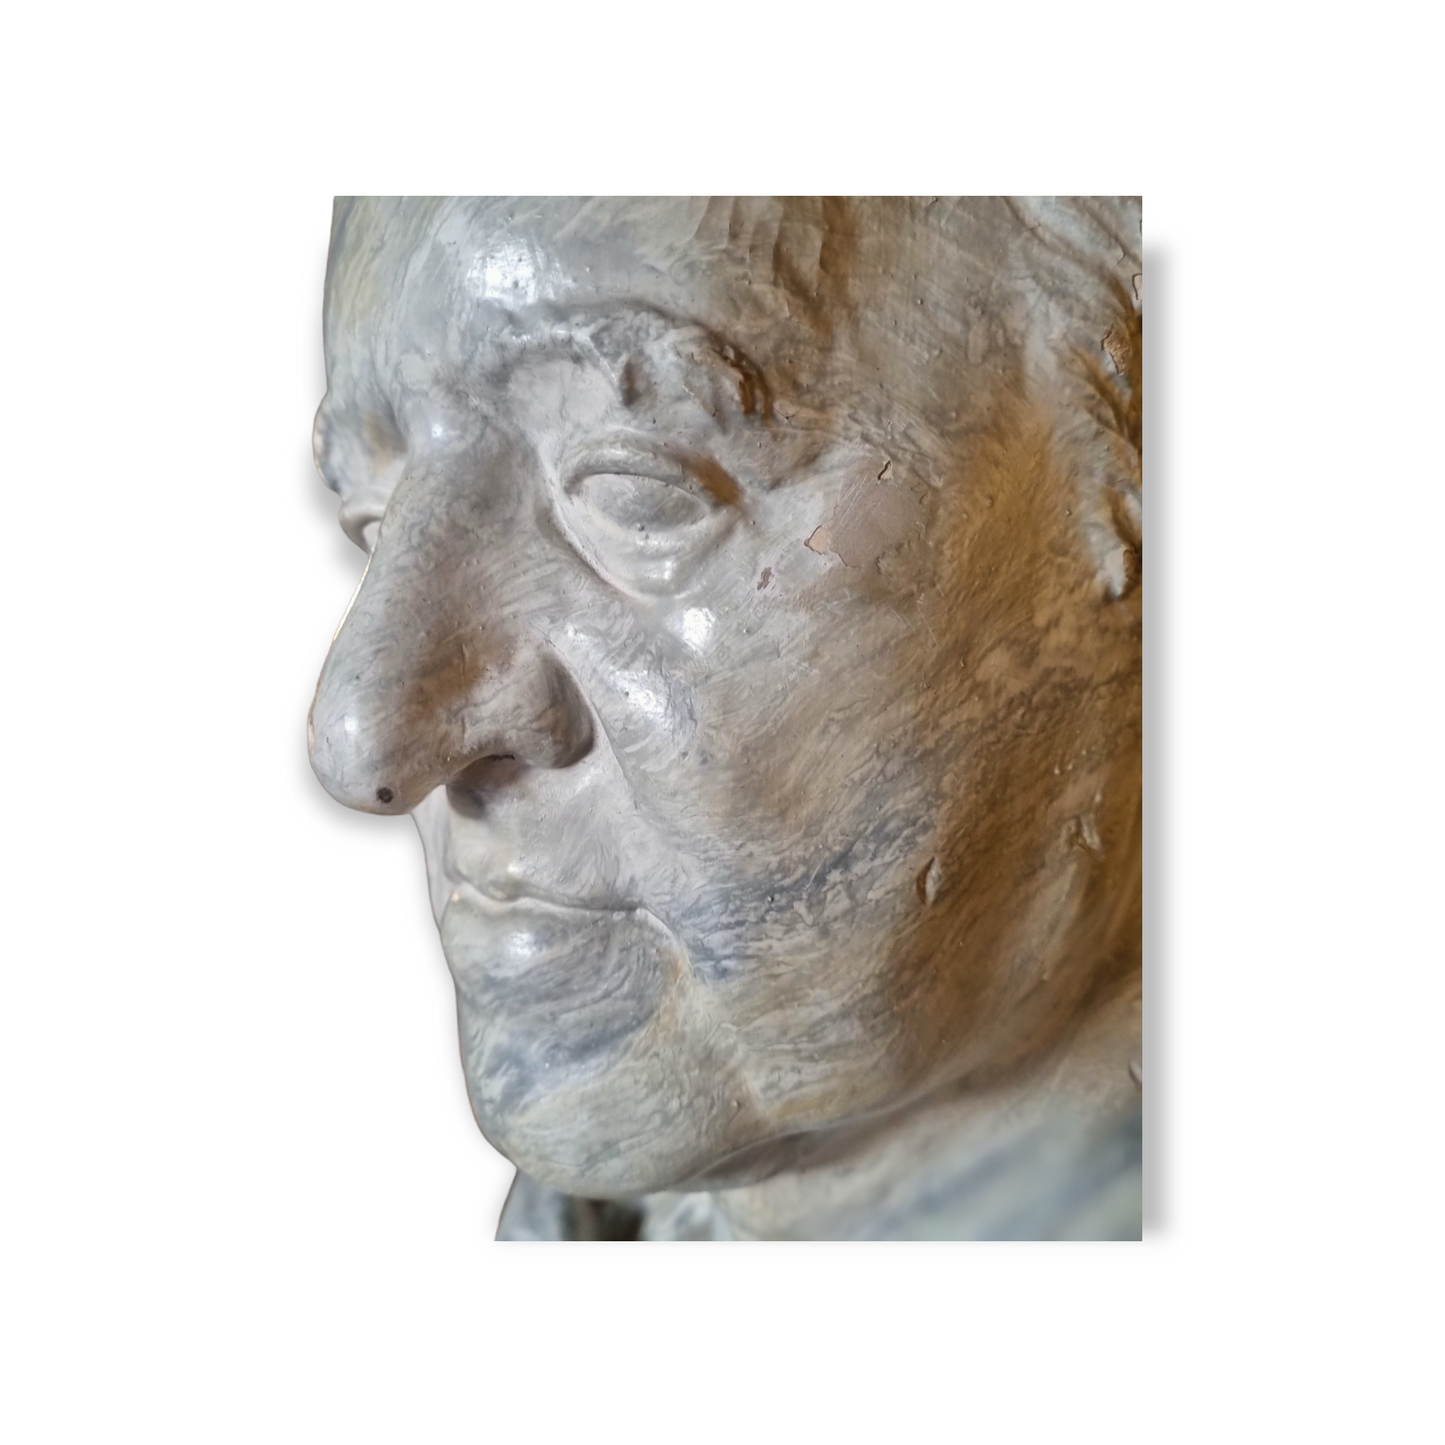 Robert William Sievier (1794-1865) - An Early 19th Century English Antique Faux Marble, Life-Size, Bust of a Gentleman in the Classical Manner